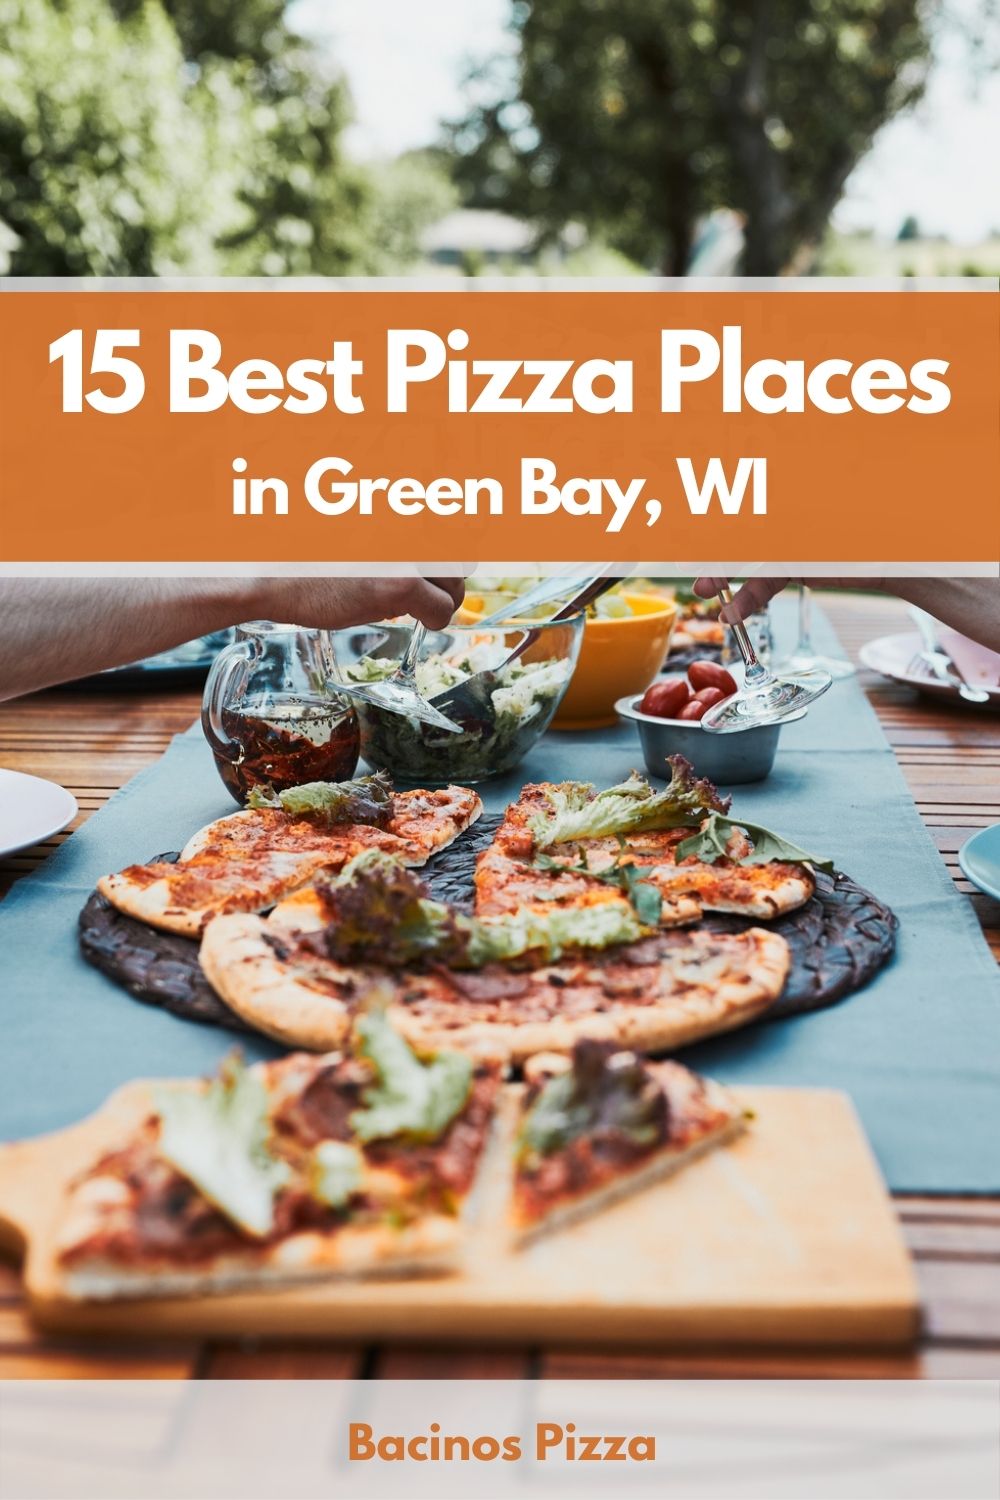 15 Best Pizza Places in Green Bay, WI pin 2